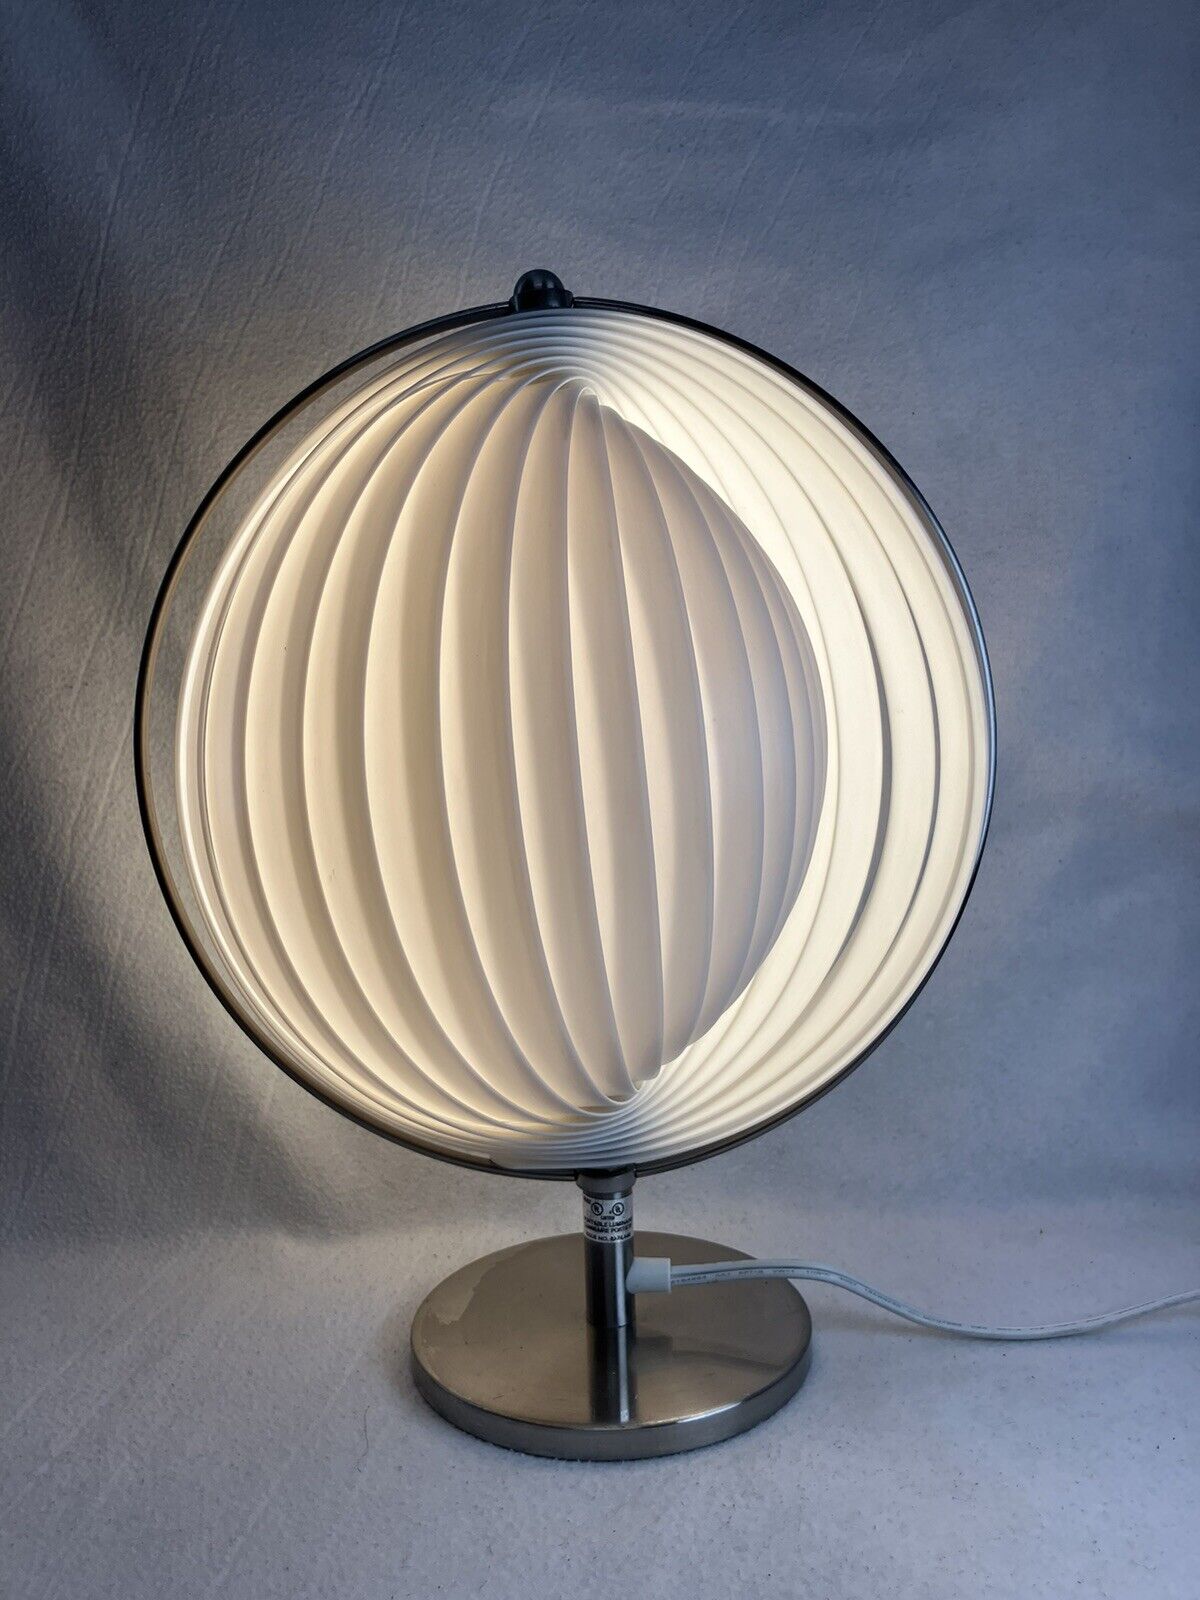 Verner Panton Style Moon Lamp, Table Lamp w/ Cascading Light Filtering Blades